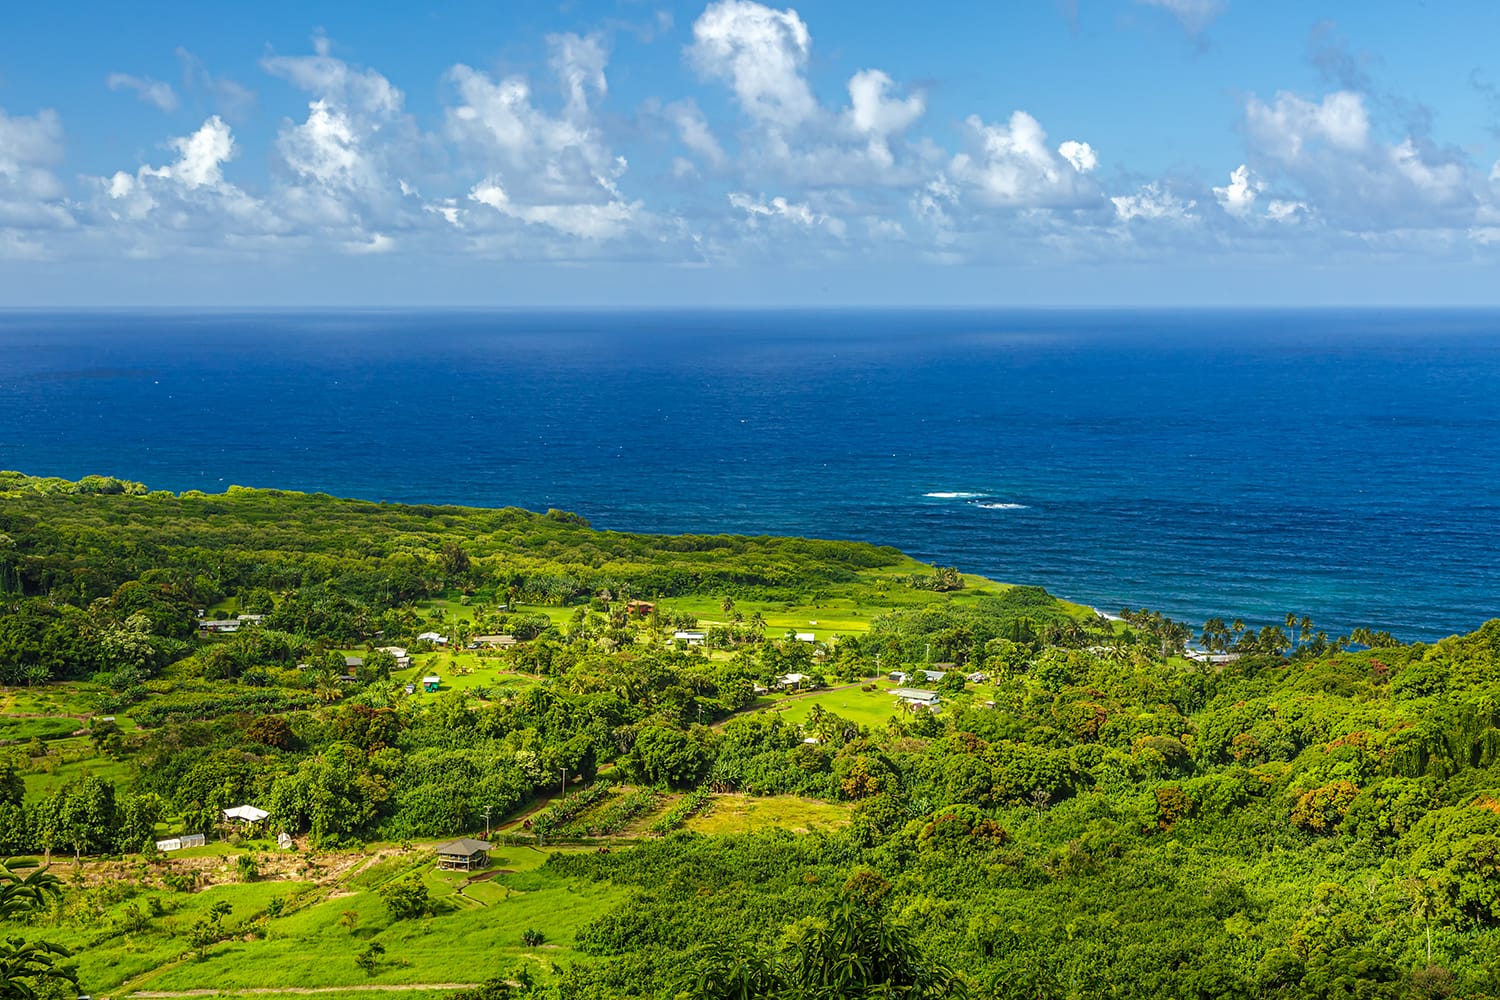 A view of Wailua Valley from the Road to Hana on Maui, Hawaii